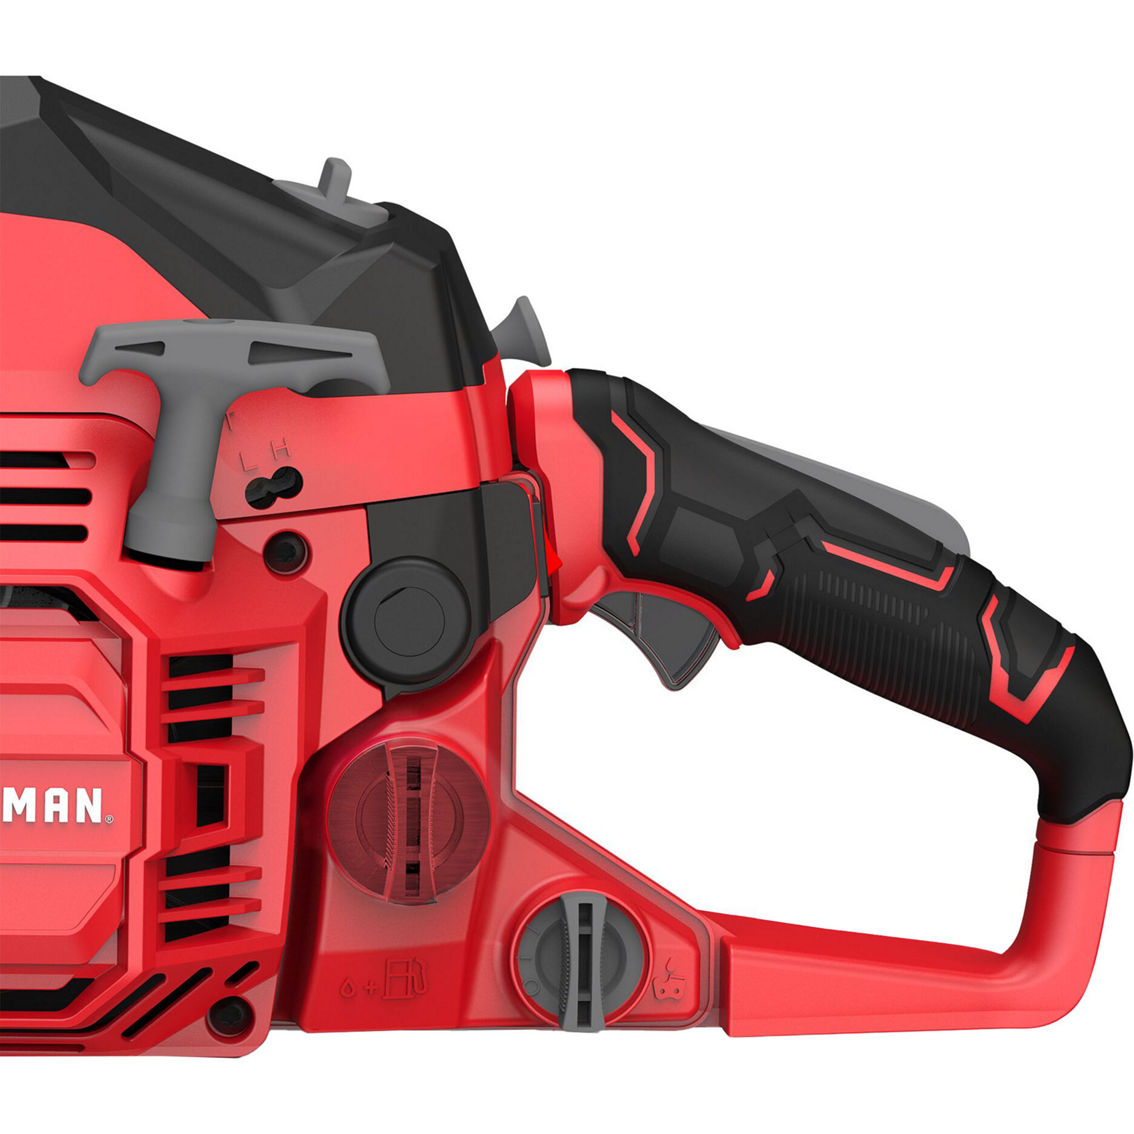 Craftsman 18 in. 42 cc 2-Cycle Gas Chainsaw - Image 4 of 6